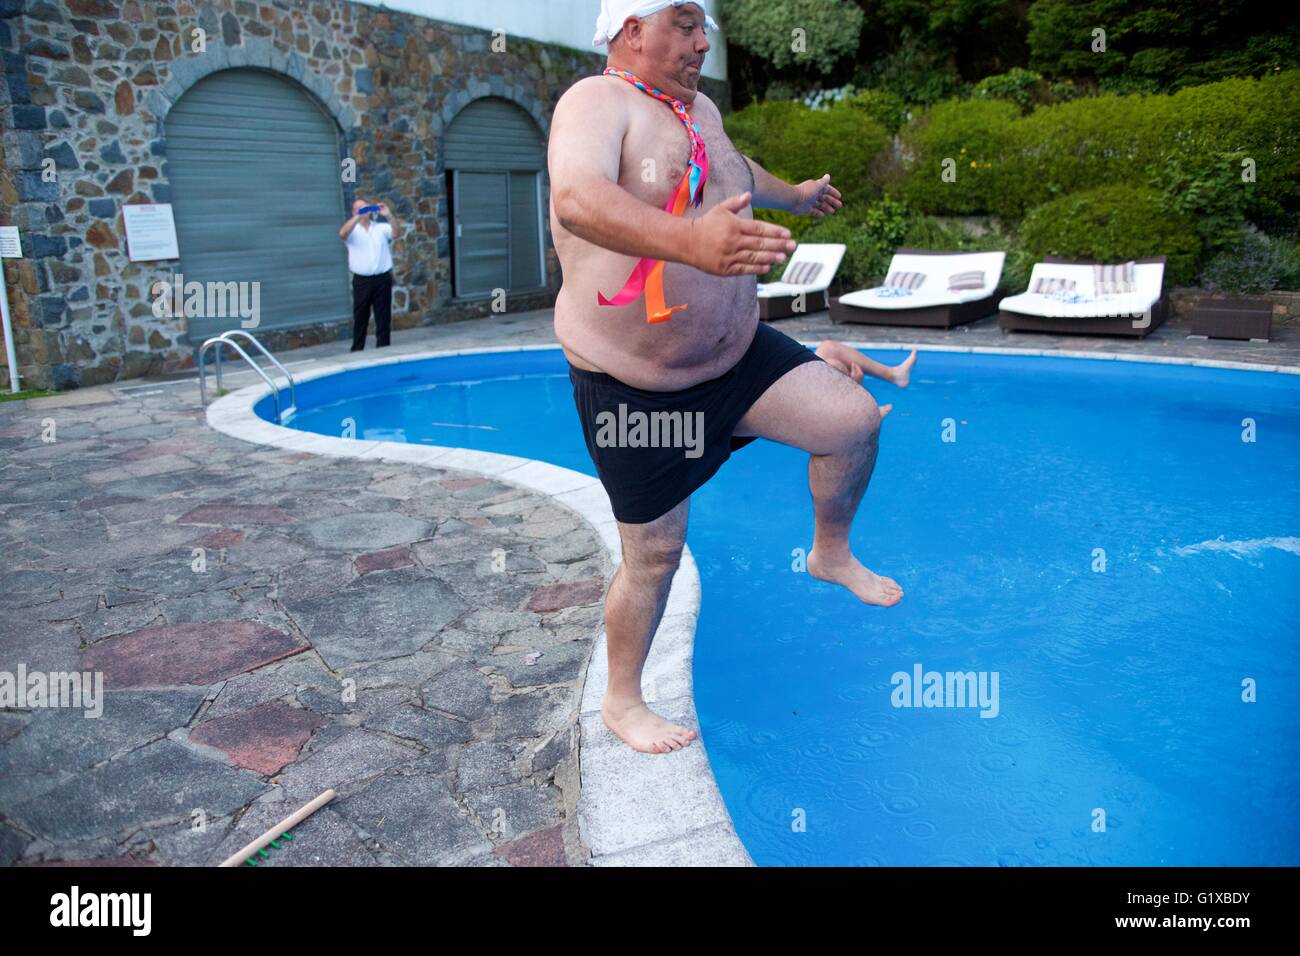 Overweight adult male jumping into swimming pool during a party. Stock Photo